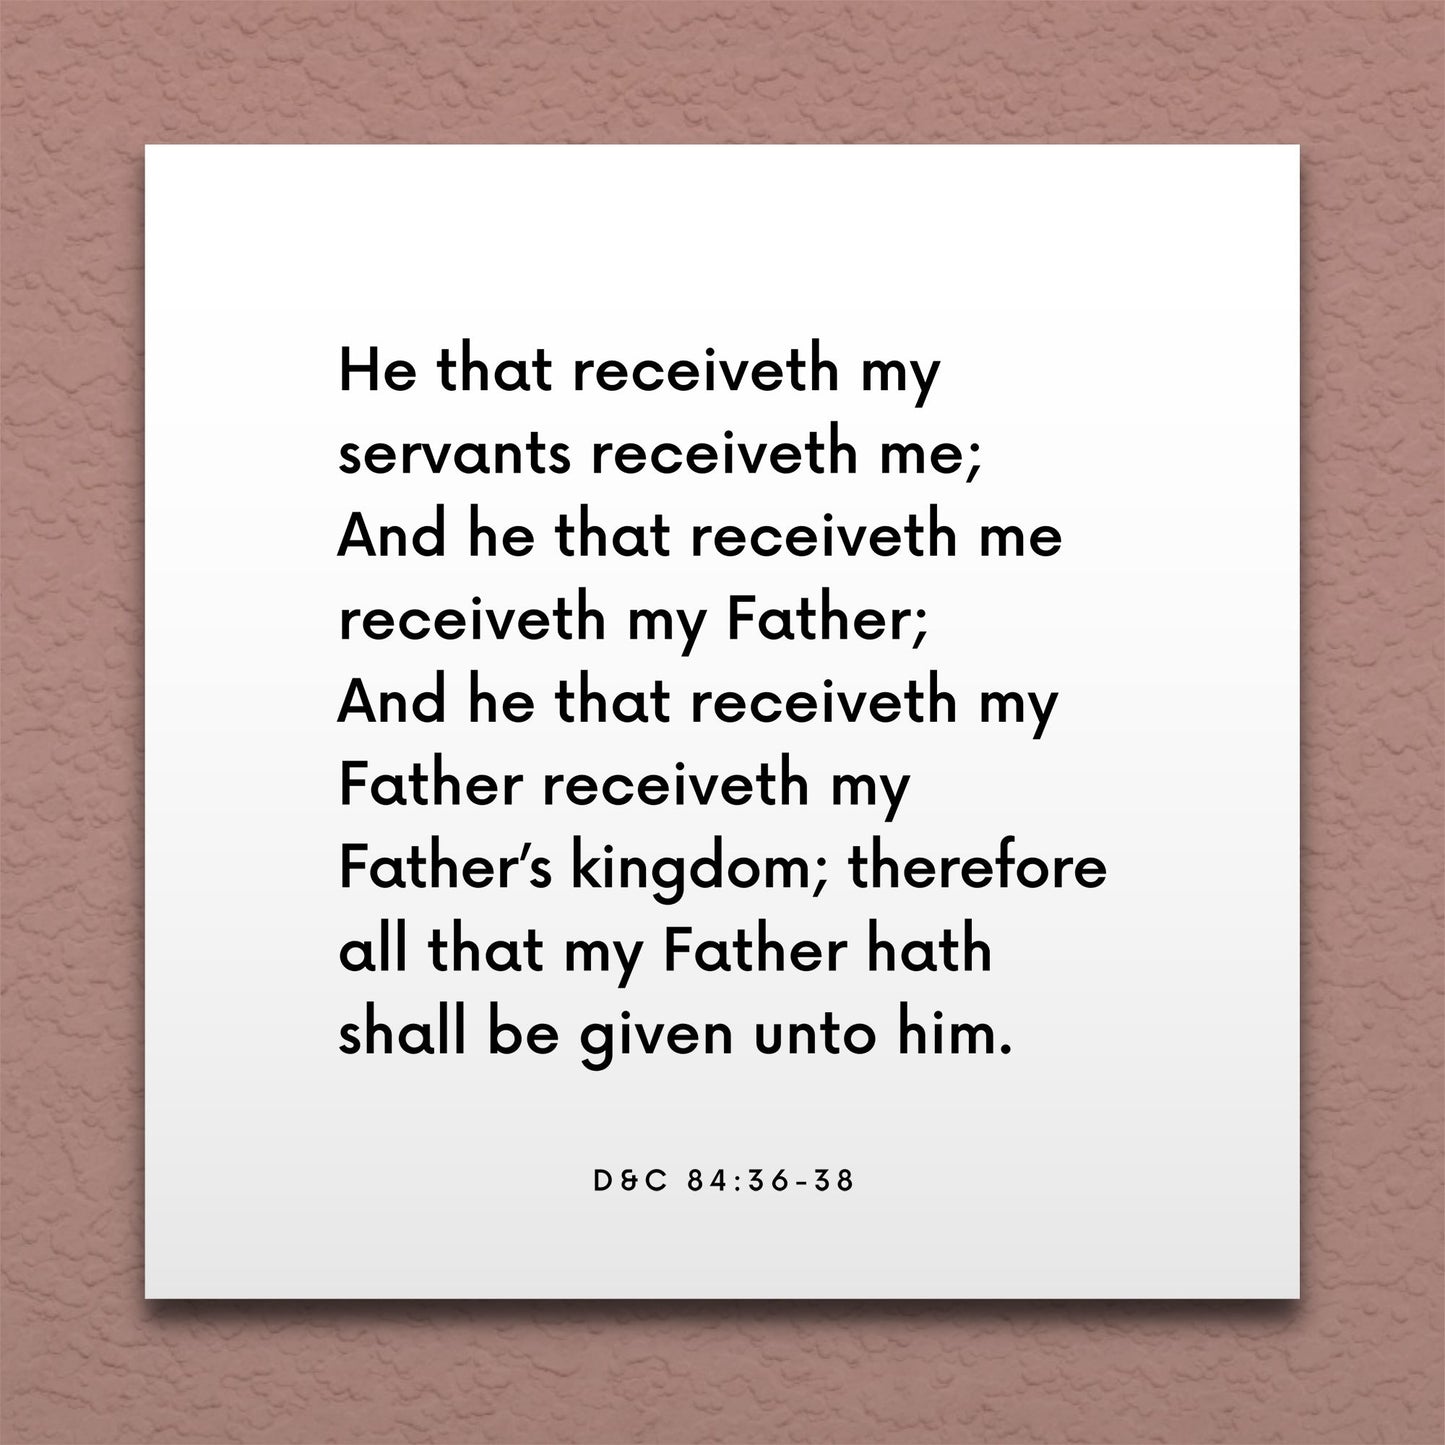 Wall-mounted scripture tile for D&C 84:36-38 - "He that receiveth my servants receiveth me"